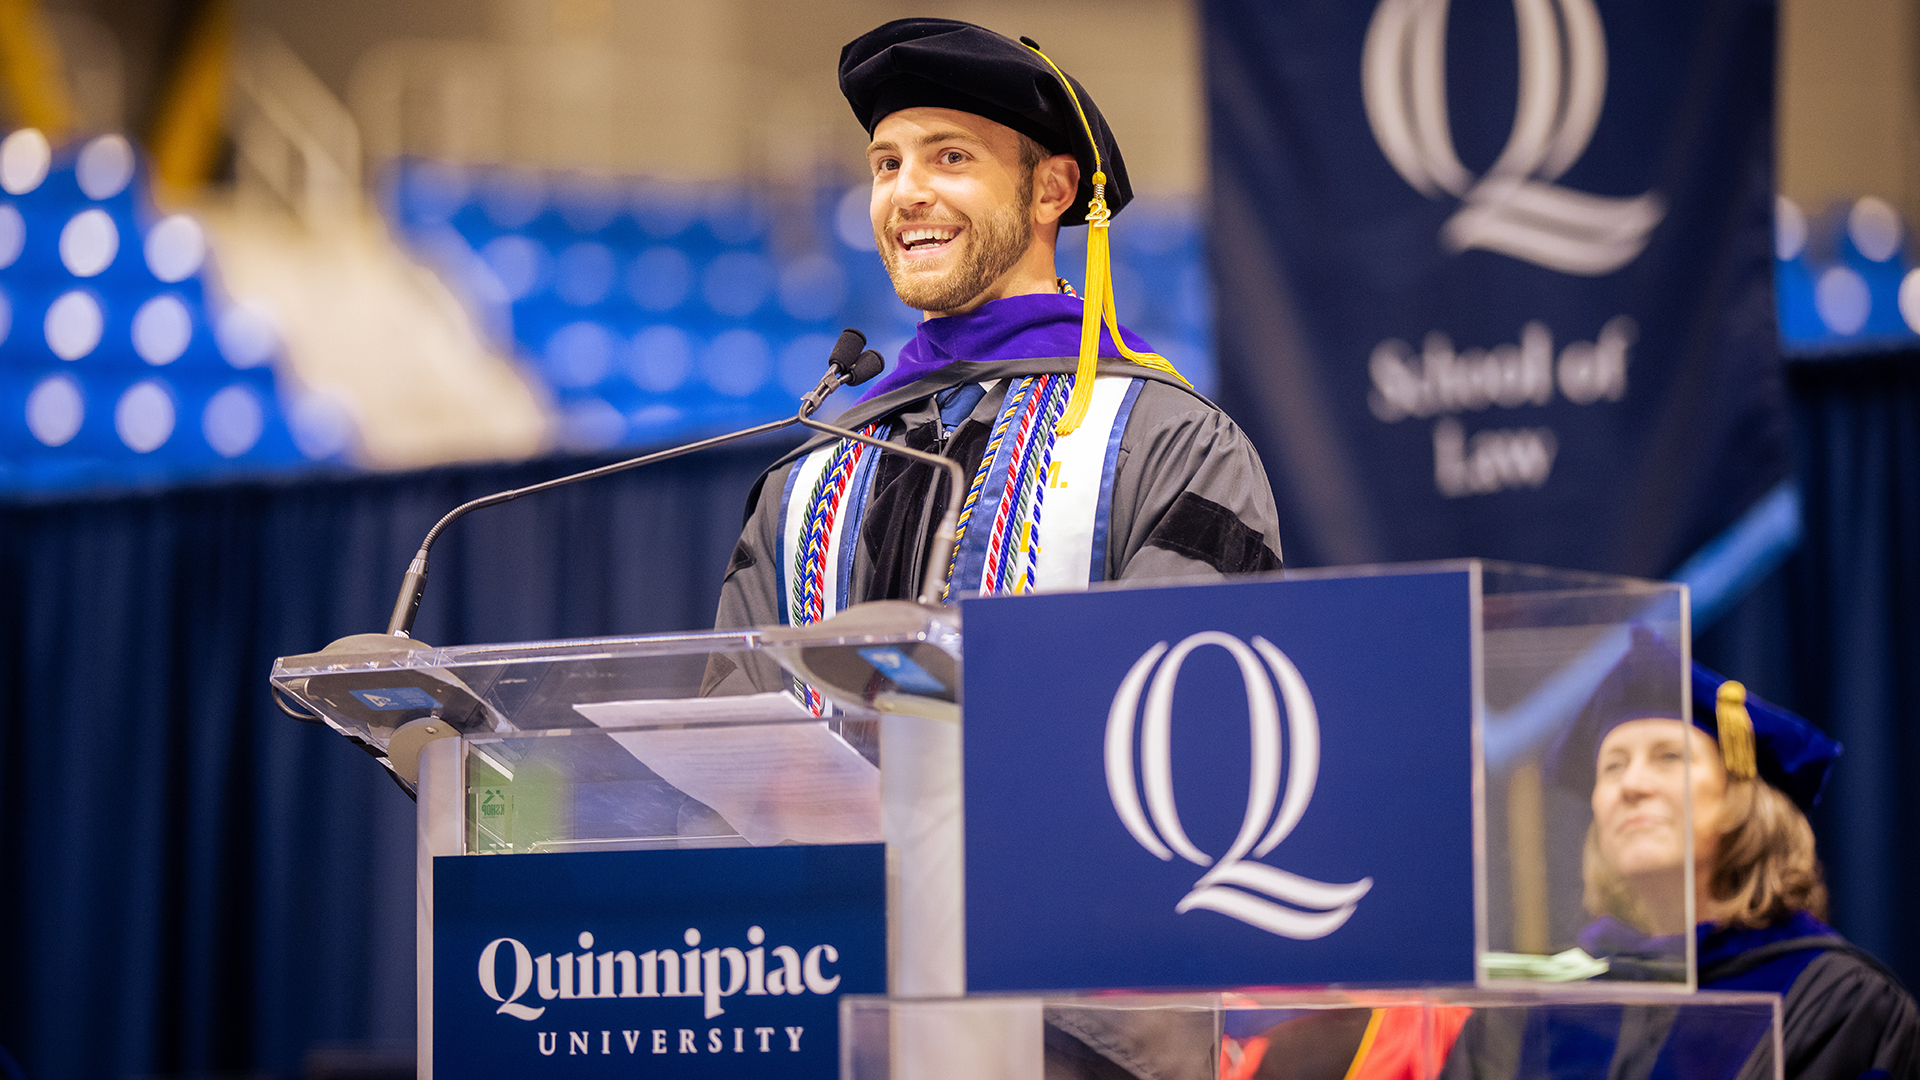 Quinnipiac University confers 128 law degrees during commencement exercises for the School of Law